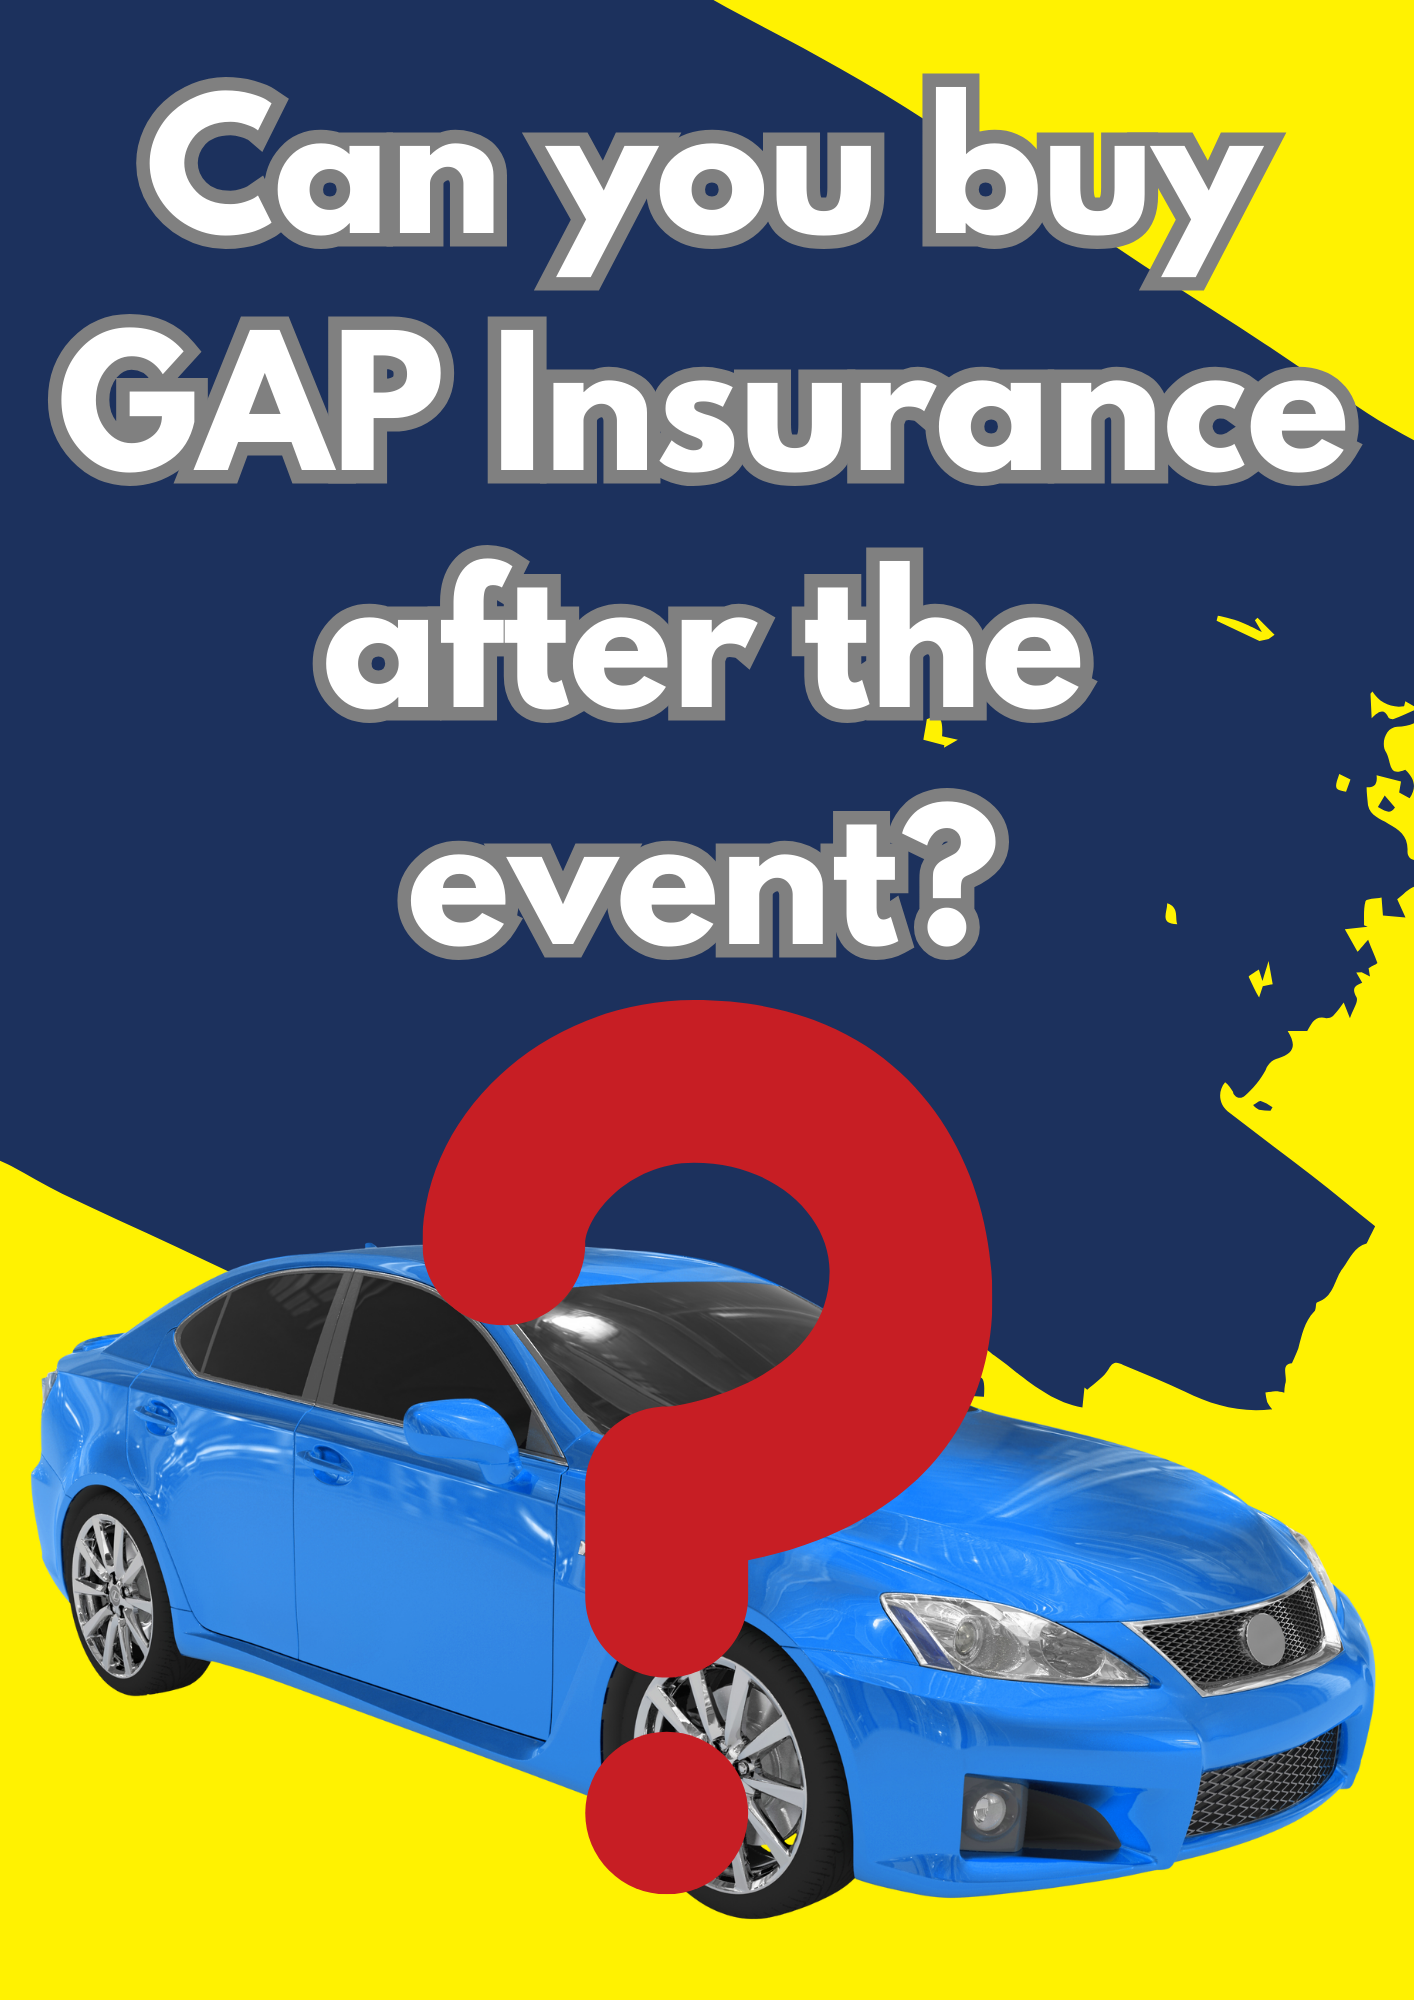 Can you buy GAP Insurance after the event?